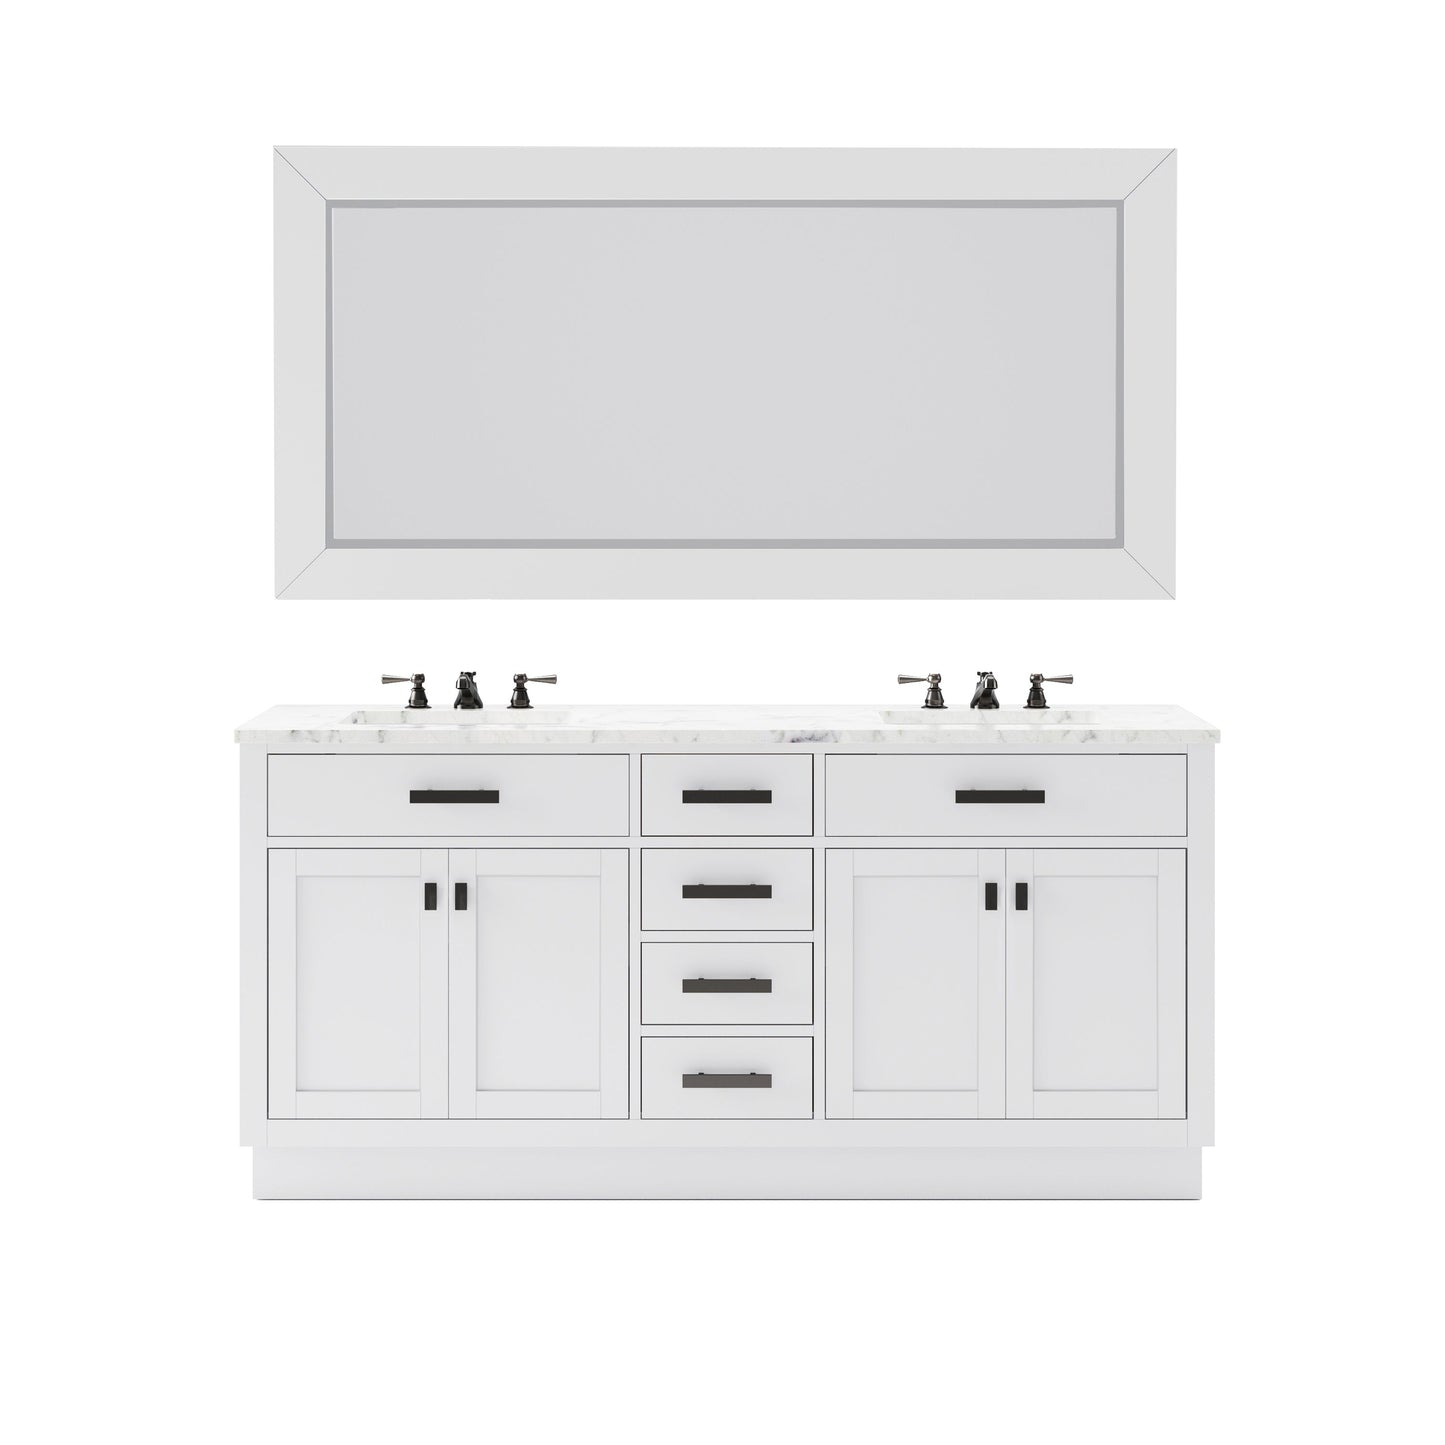 Water Creation Hartford 72" Double Sink Carrara White Marble Countertop Bath Vanity in Pure White with Gooseneck Faucet and Rectangular Mirror